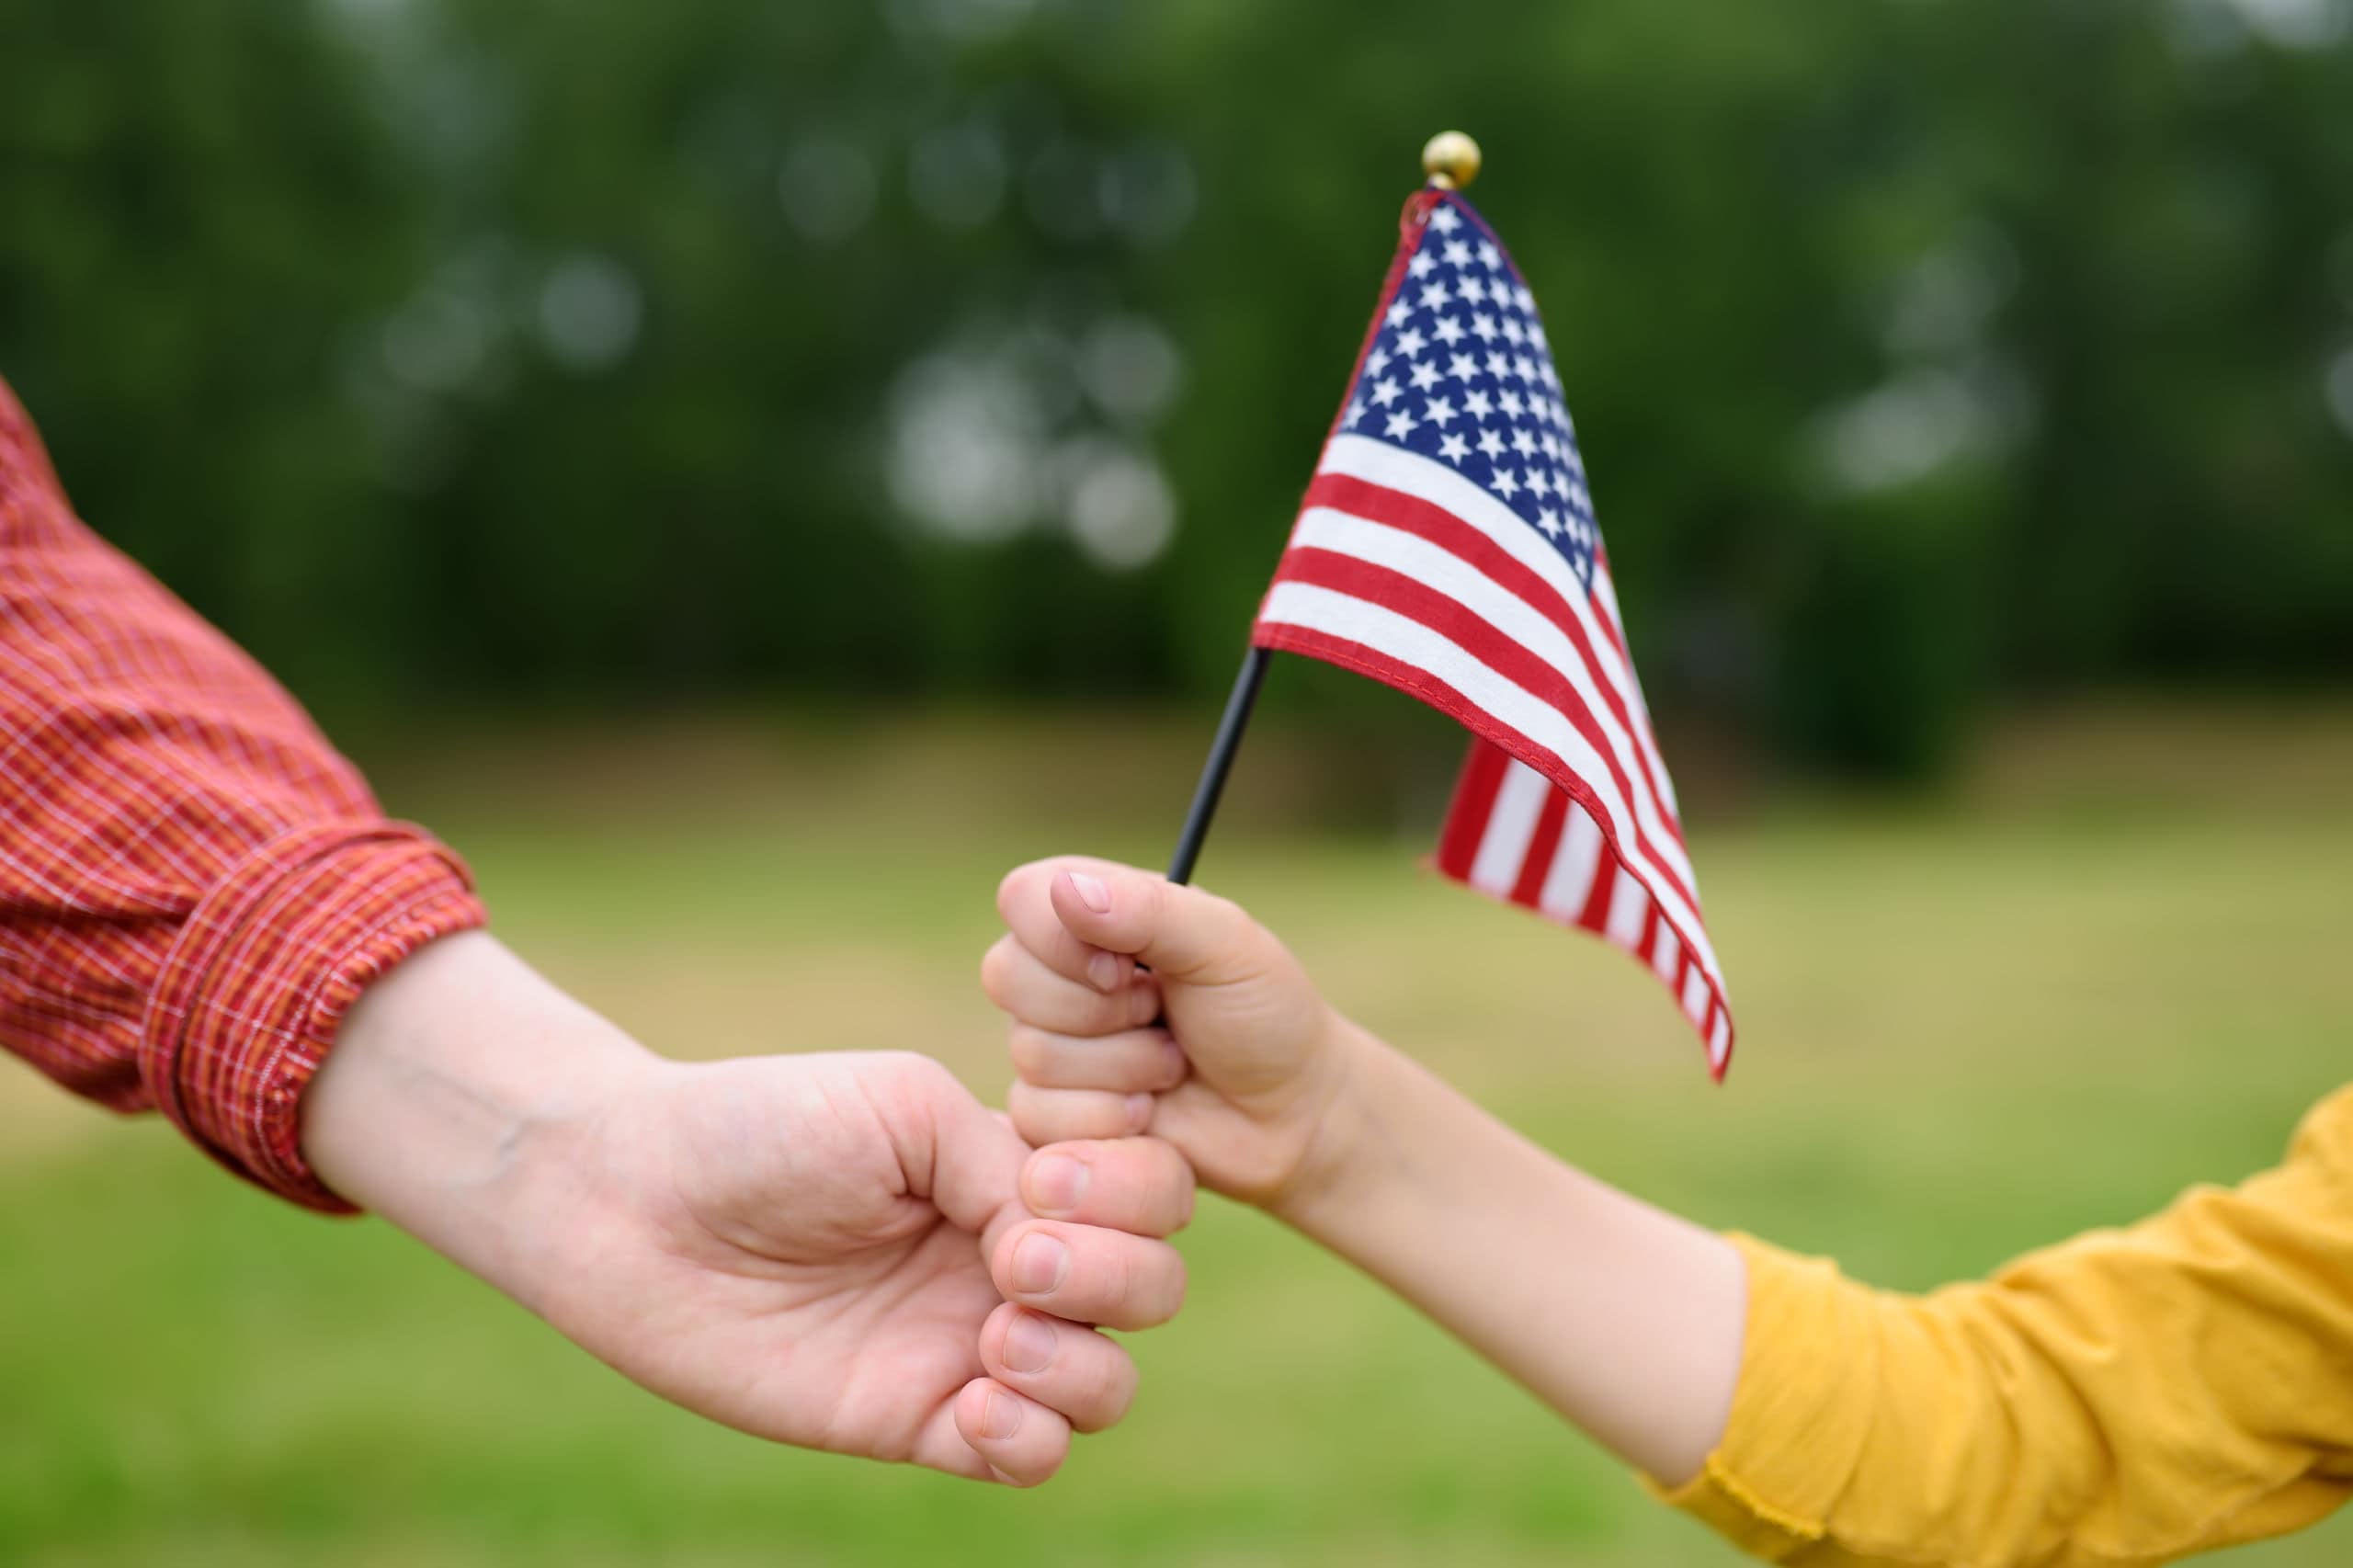 two hands holding a small american flag